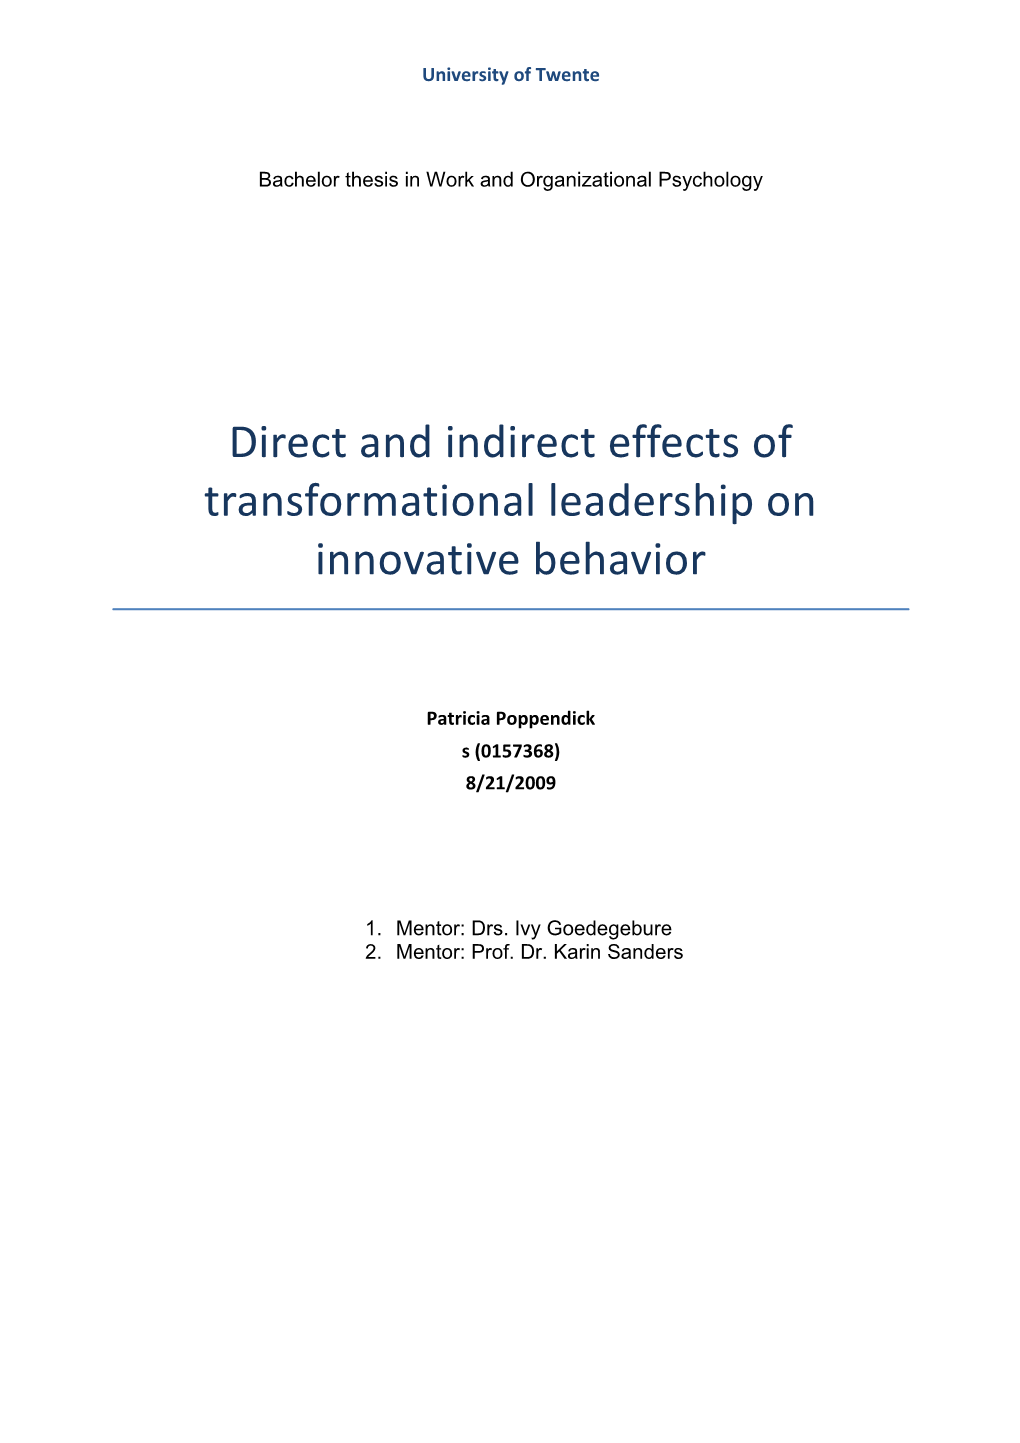 Direct and Indirect Effects of Transformational Leadership on Innovative Behavior